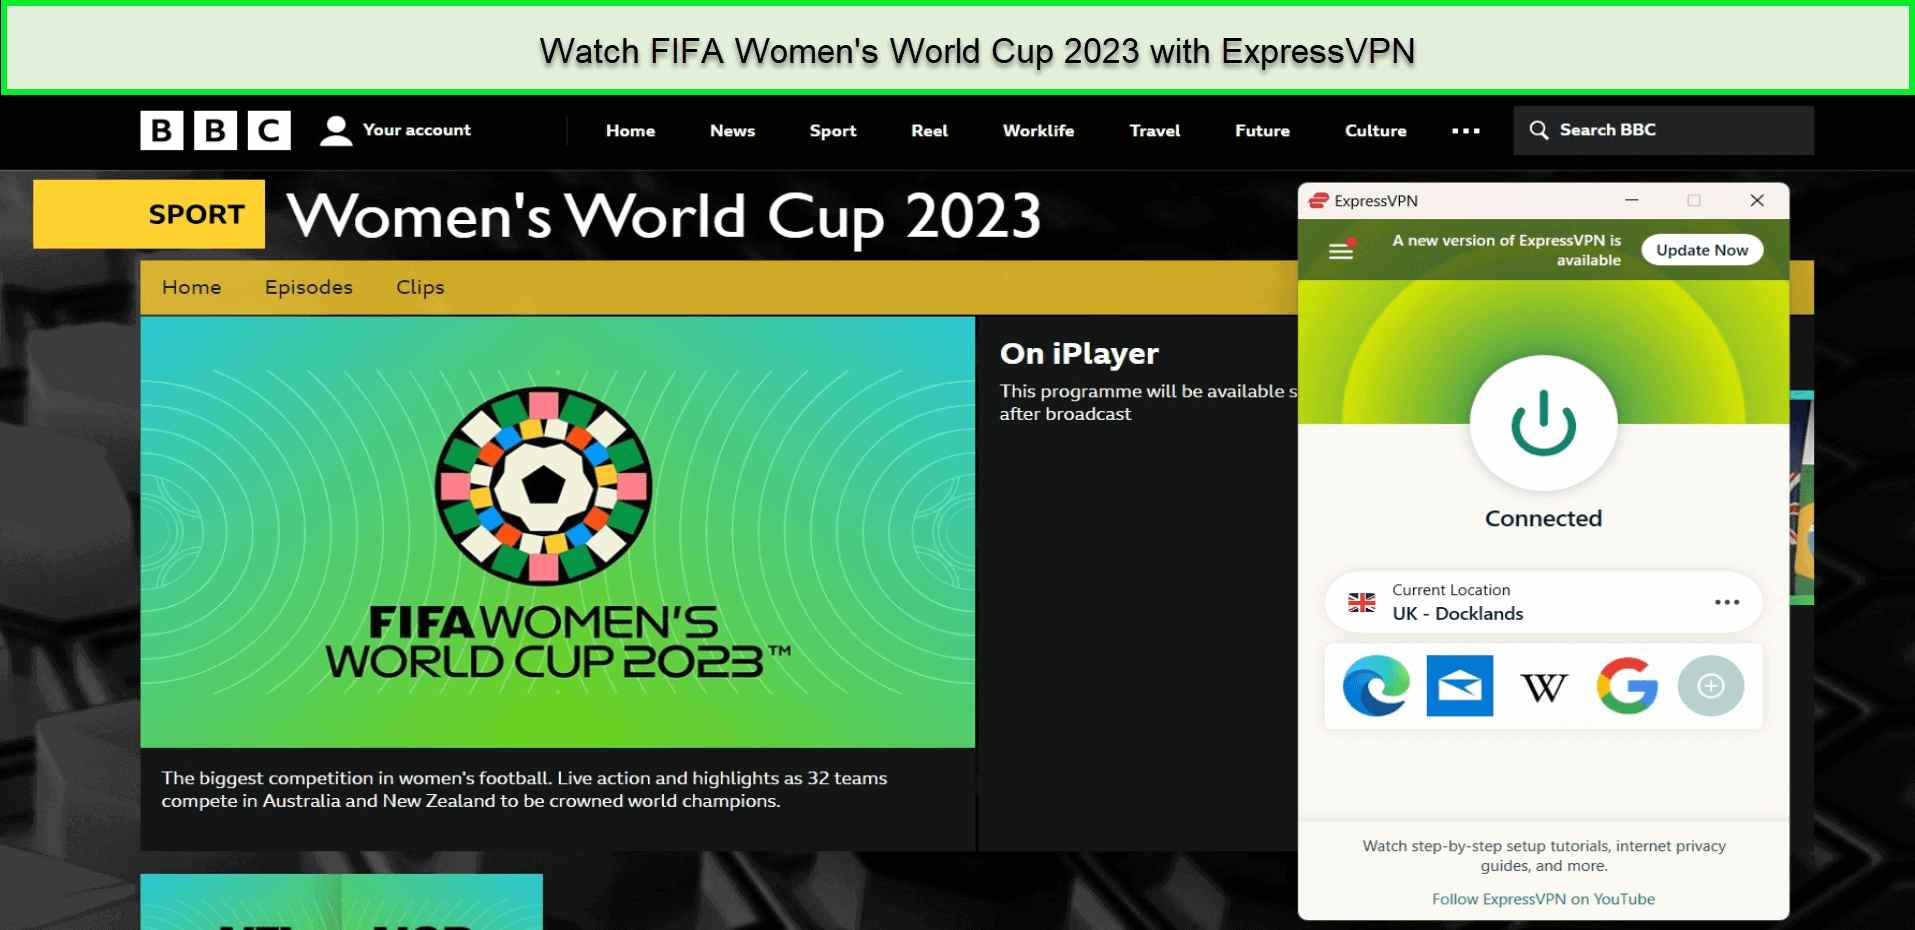 Unblock and Watch-FIFA-Womens-World-Cup-2023-in-Hong Kong-on-BBC-iPlayer-with-ExpressVPN 